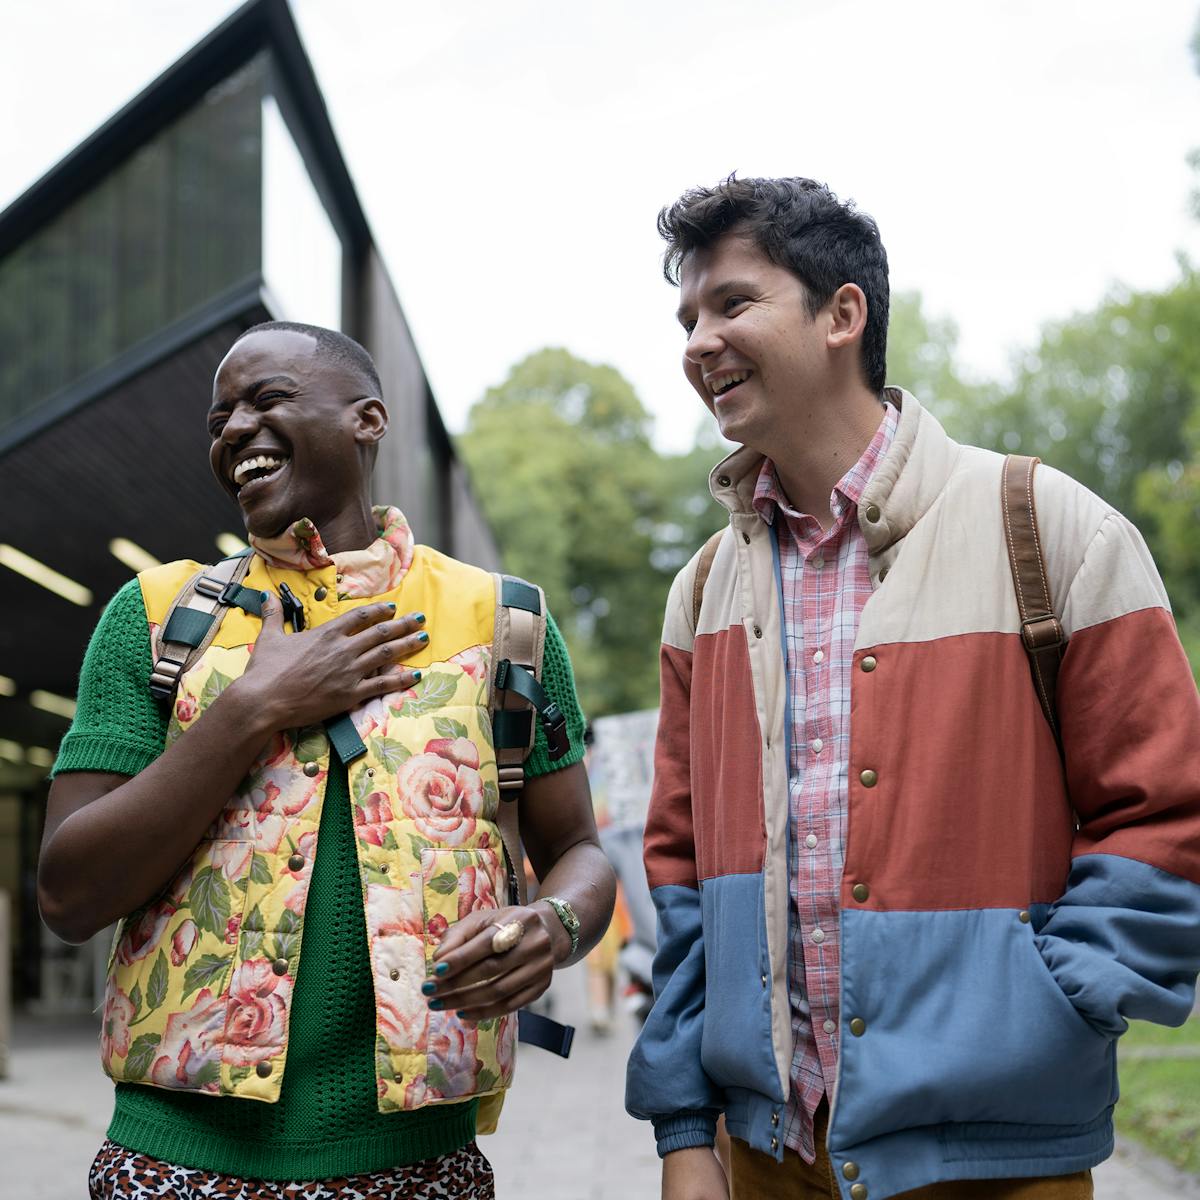 Eric Effiong (Ncuti Gatwa) and Otis Milburn (Asa Butterfield) stand outside their school laughing. Eric wears a flowery puffy vest and Otis wears his trademark white, red, and blue jacket.